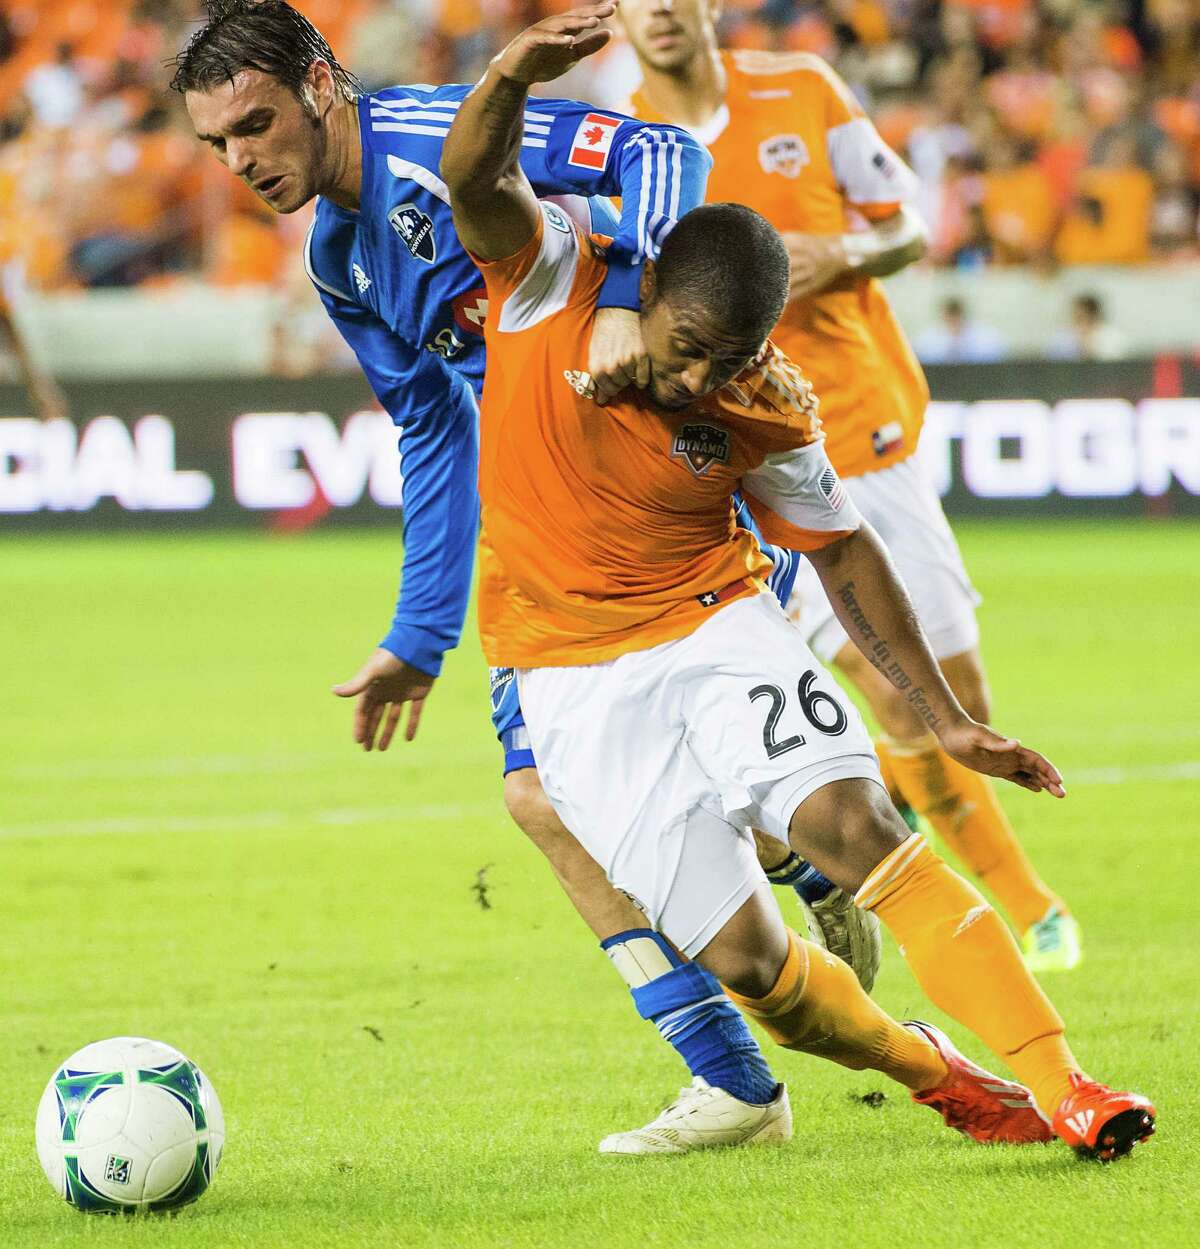 Houston Dynamo midfielder Corey Ashe (26) fights for the ball against Montreal Impact midfielder Andrea Pisanu (31) during the first half of a MLS playoff soccer match on Thursday, Oct. 31, 2013, at BBVA Compass Stadium in Houston. ( Smiley N. Pool / Houston Chronicle )